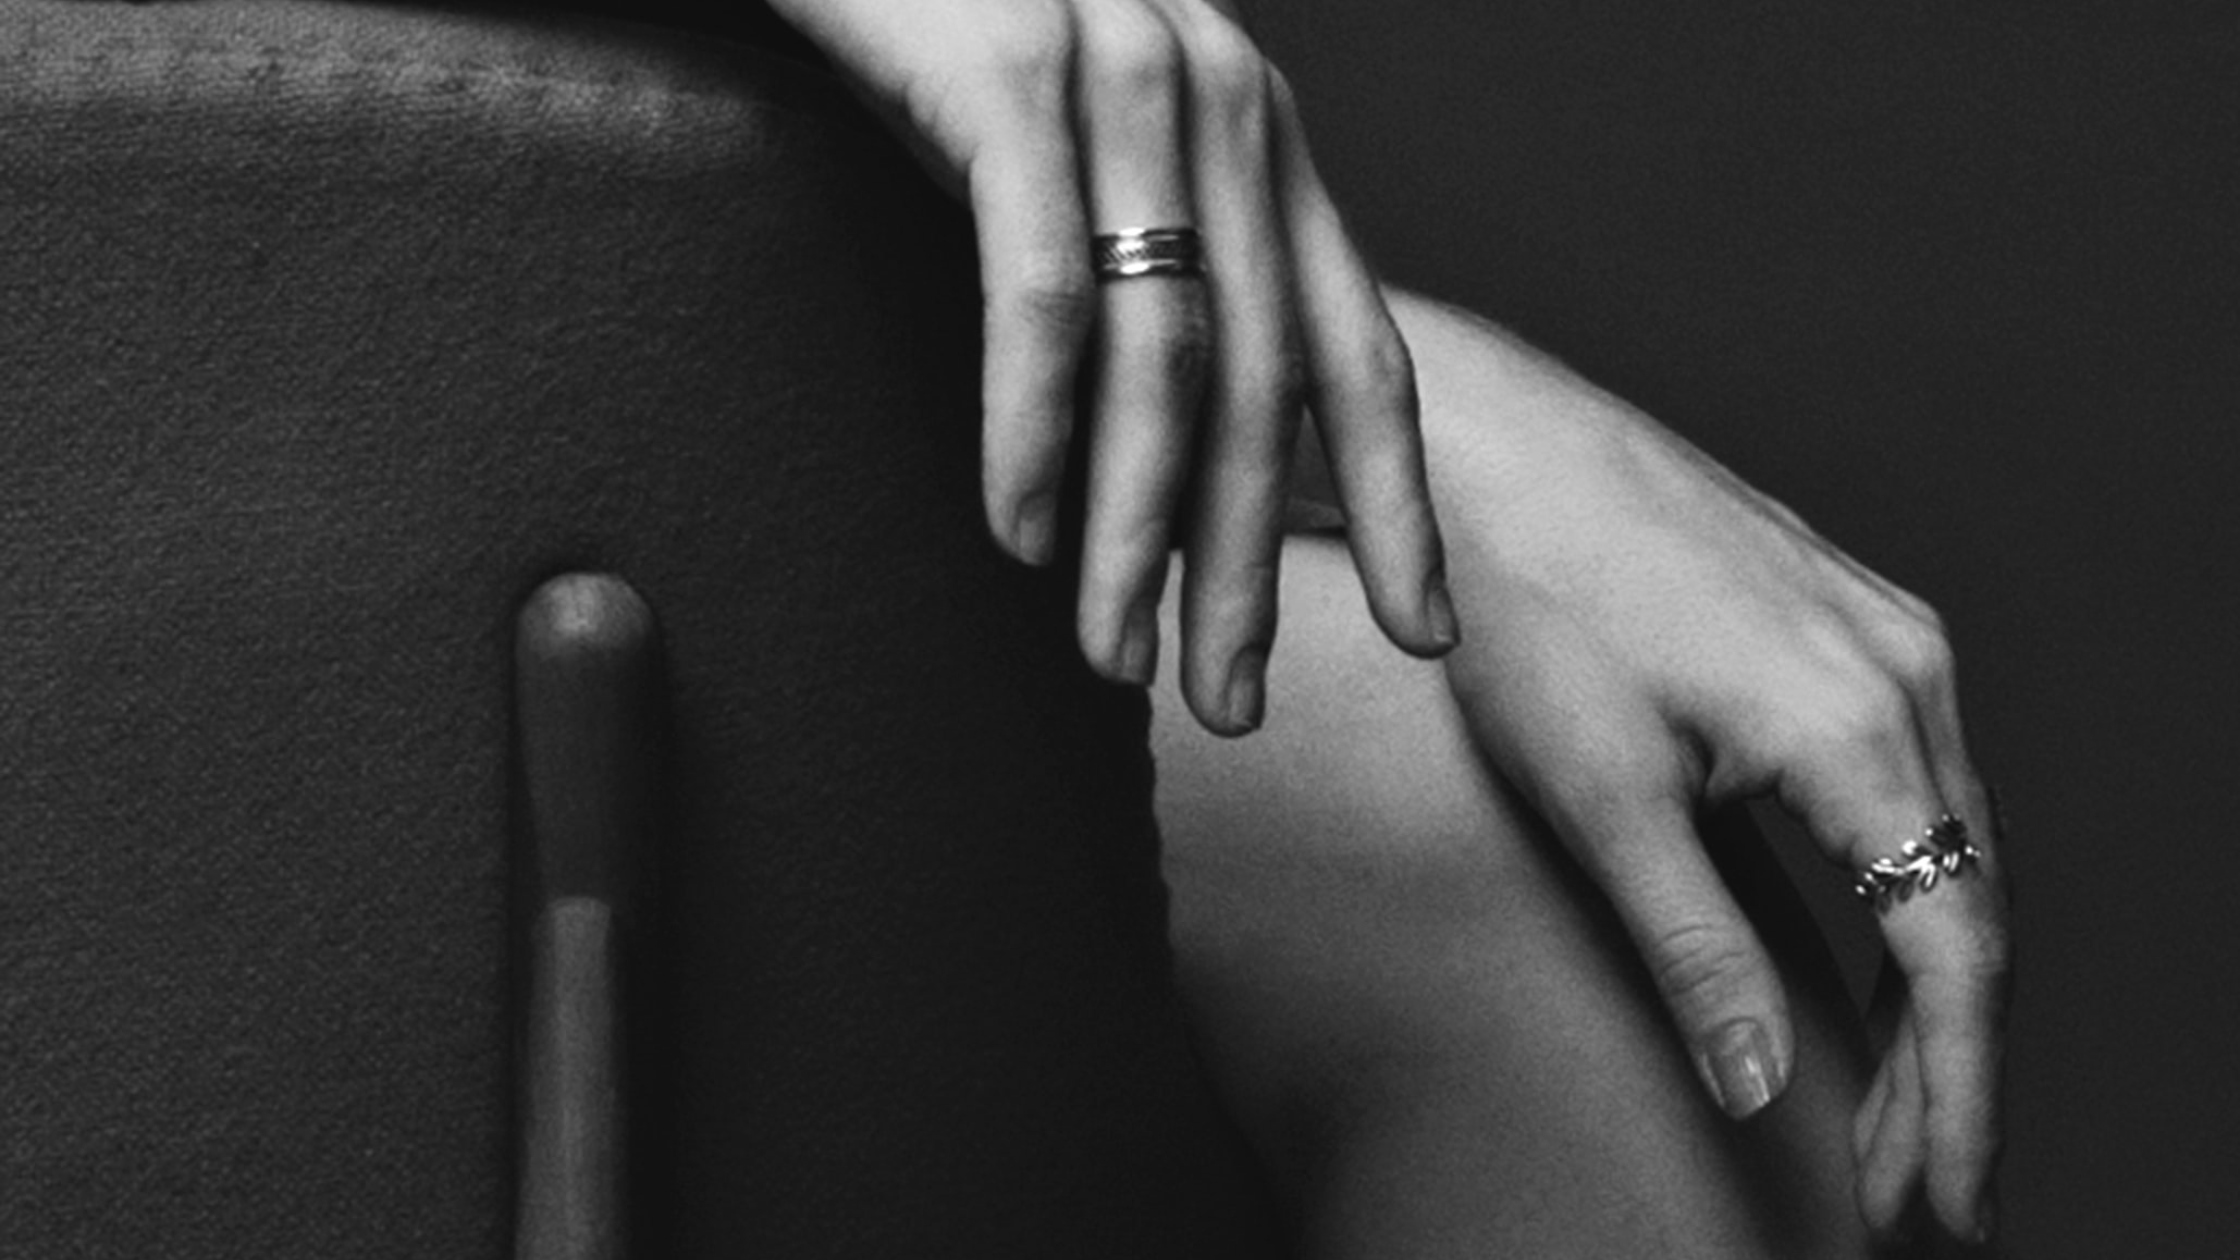 black and white photo of woman's hands wearing rings divine feminine energy in business